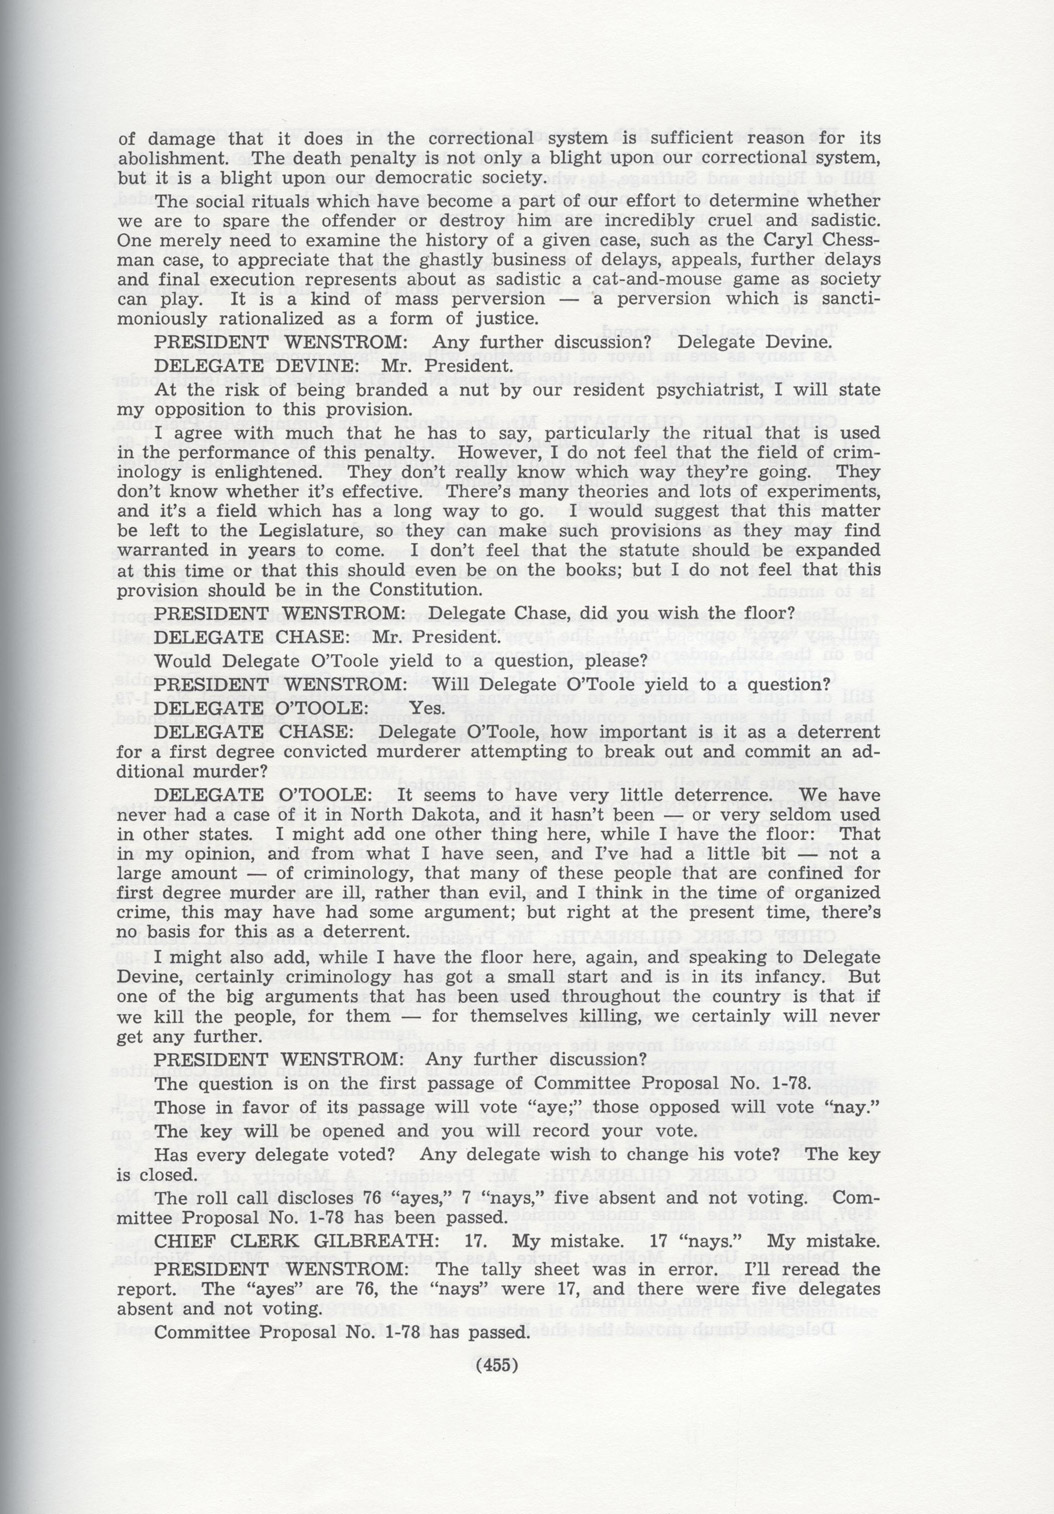 Death Penalty Debate. The committee on the Preamble, Bill of Rights, and Suffrage of 1972 constitutional convention recommended that the state eliminate the death penalty. The two pages of debate reveal two different ideas about how the death penalty might be of value in a state. Though the constitution was not adopted, North Dakota eventually eliminated the death penalty. 